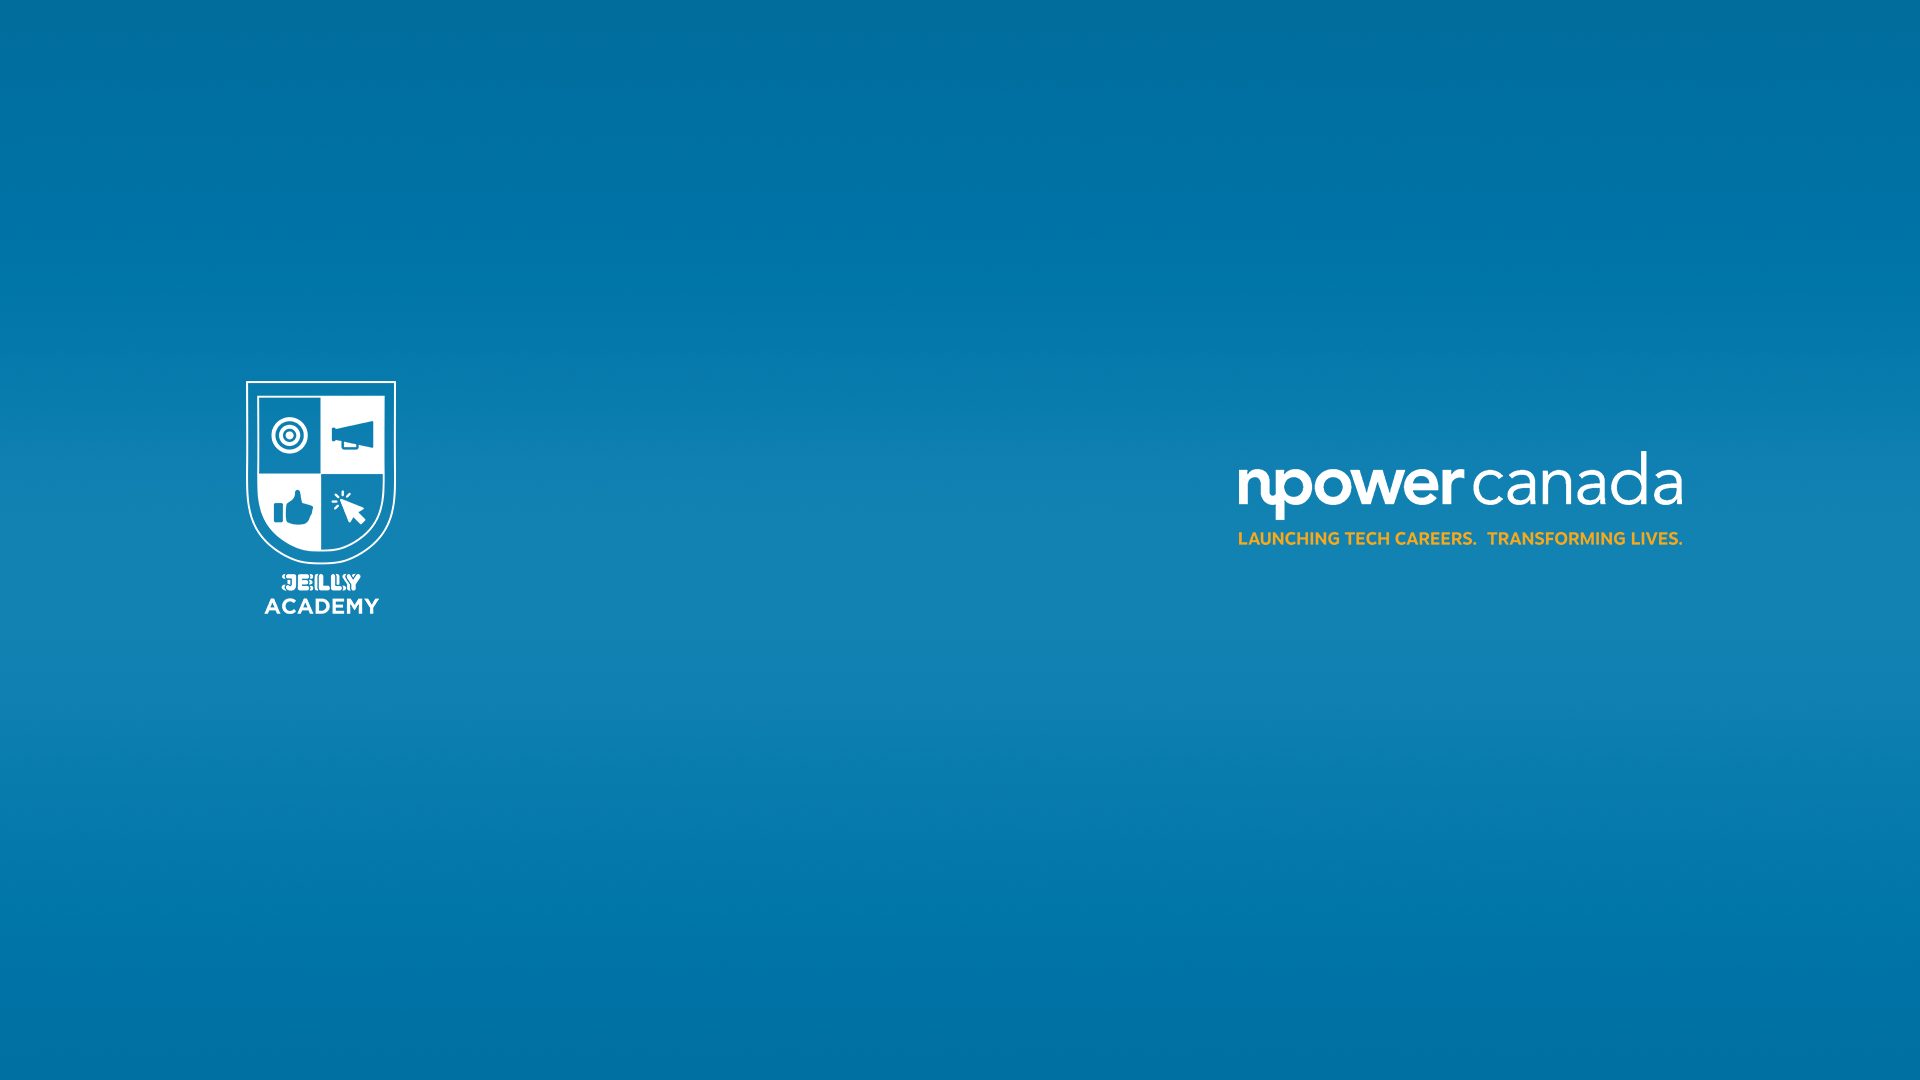 Jelly Academy logo with white icon and font text, and NPower Canada logo in blue font text with English tagline in orange font text